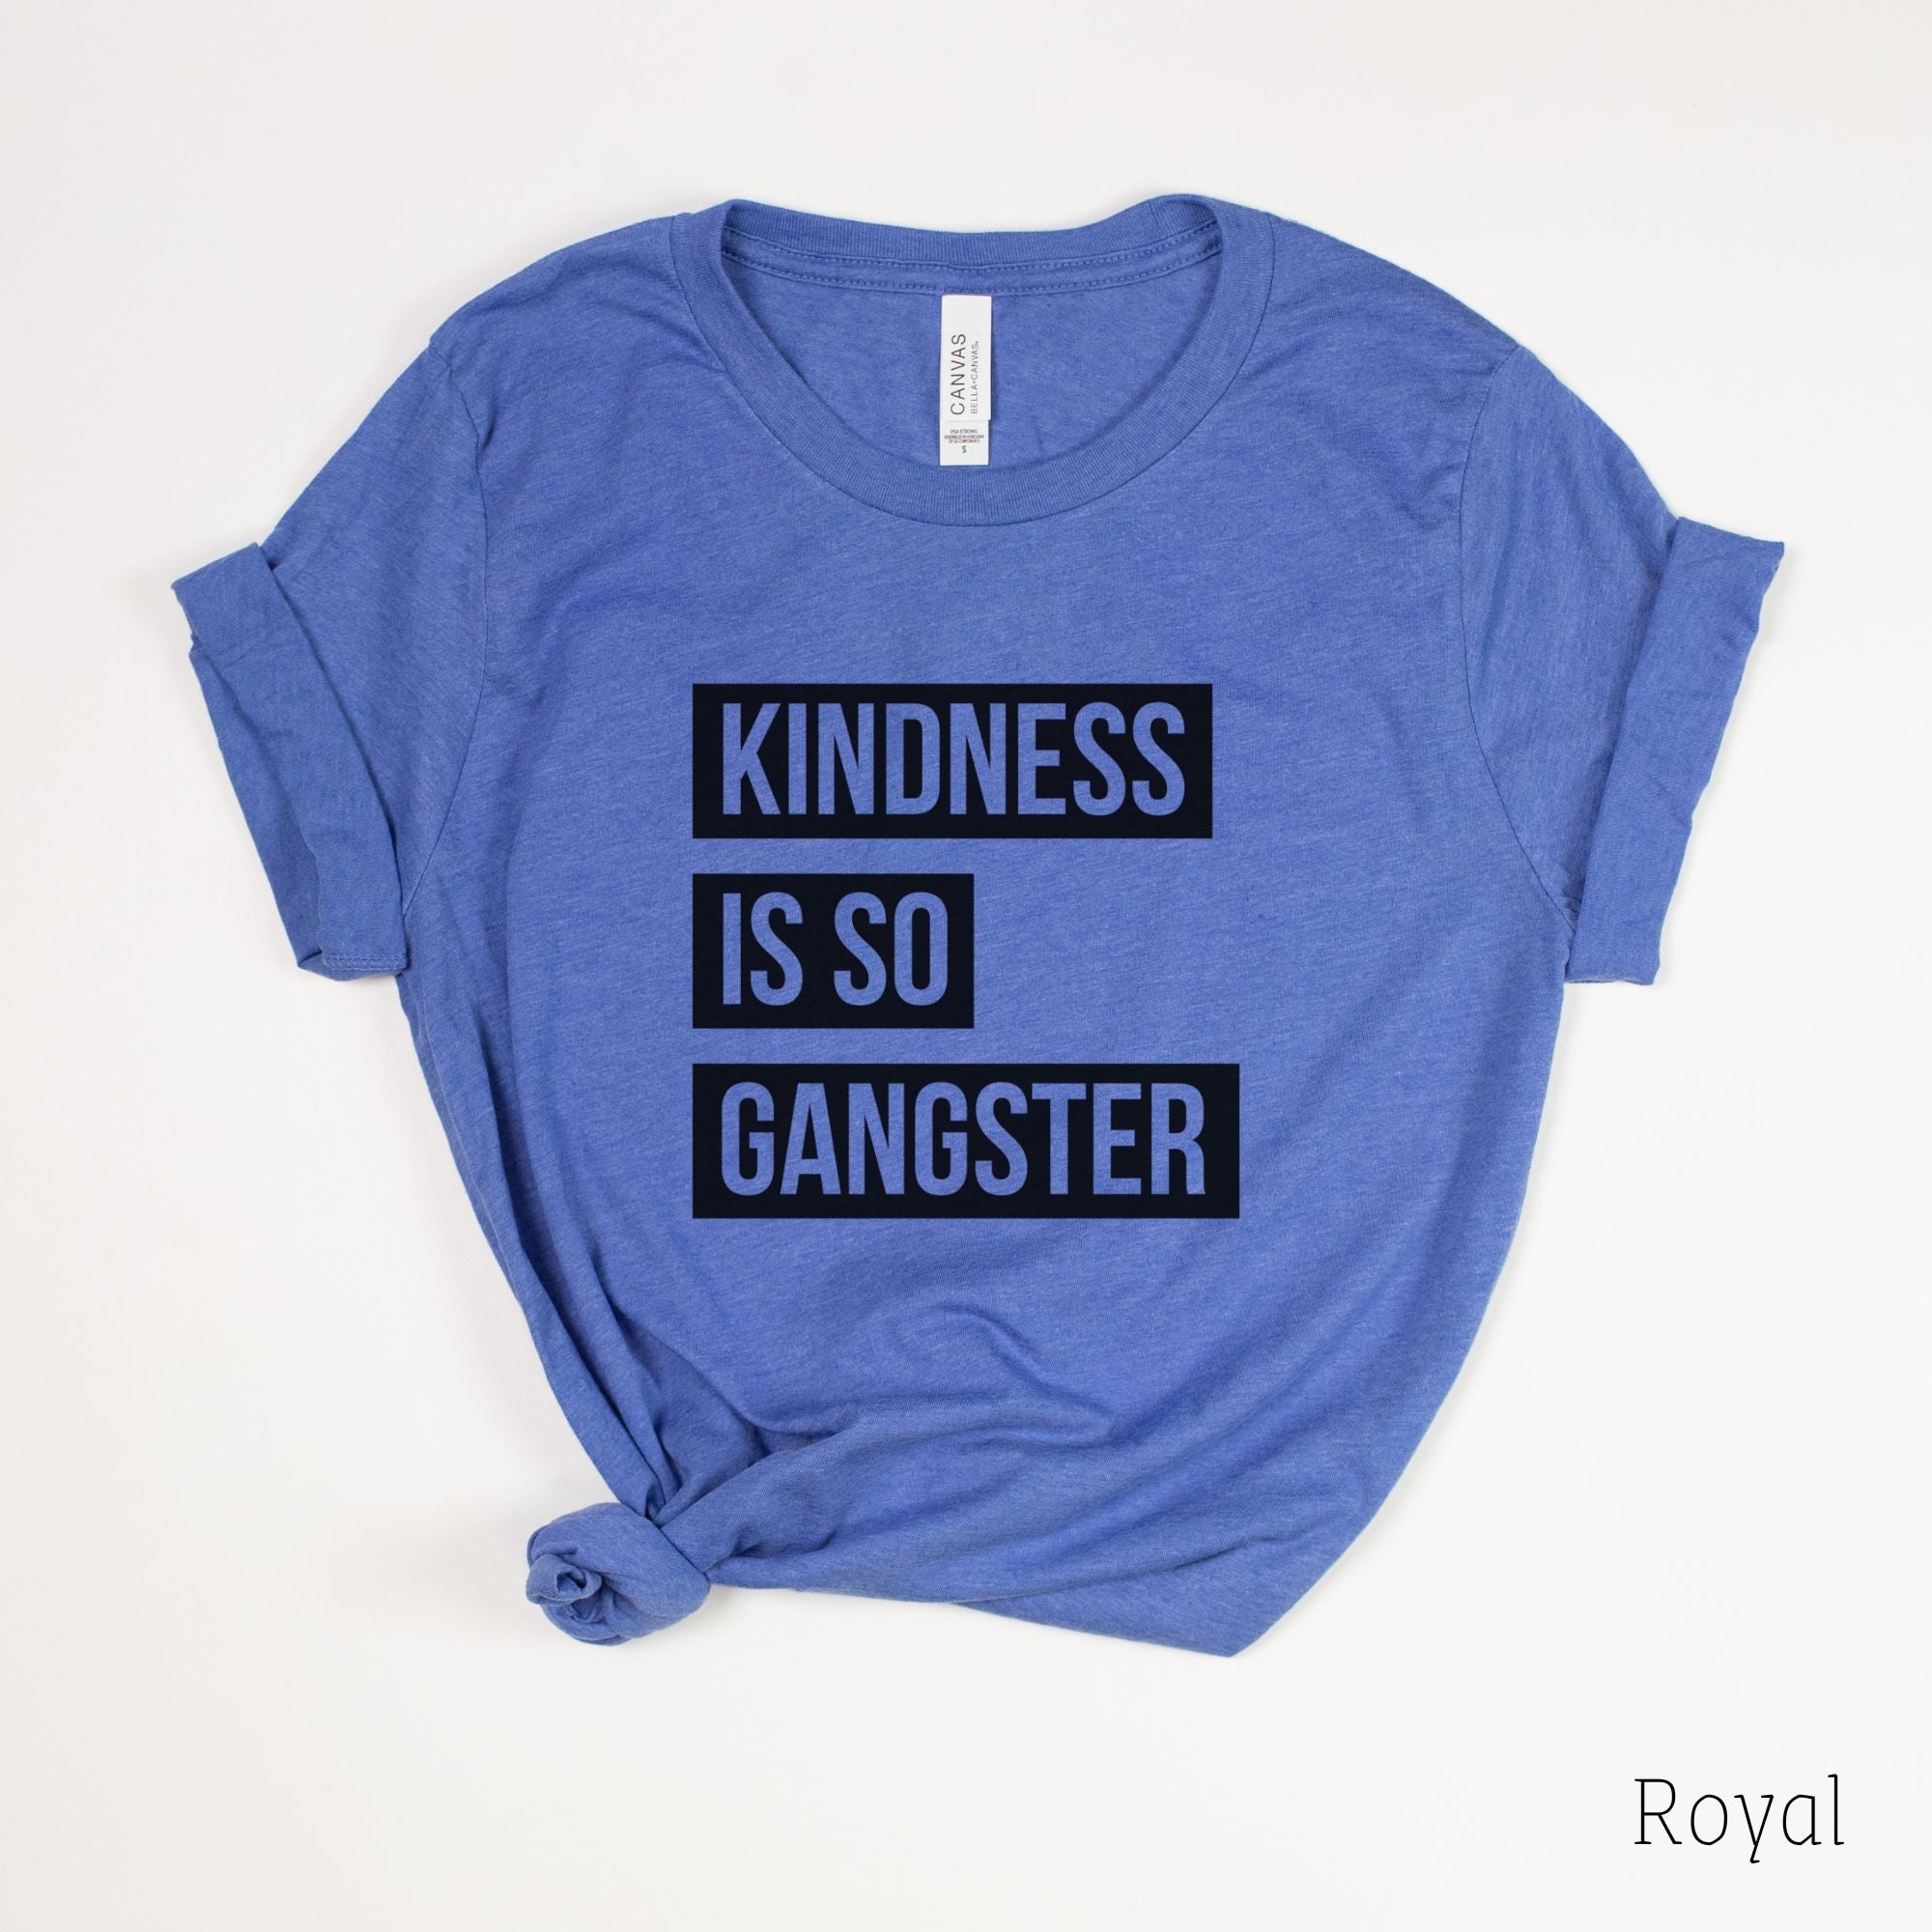 Kindness Shirt for Women *UNISEX FIT*-208 Tees Wholesale, Idaho